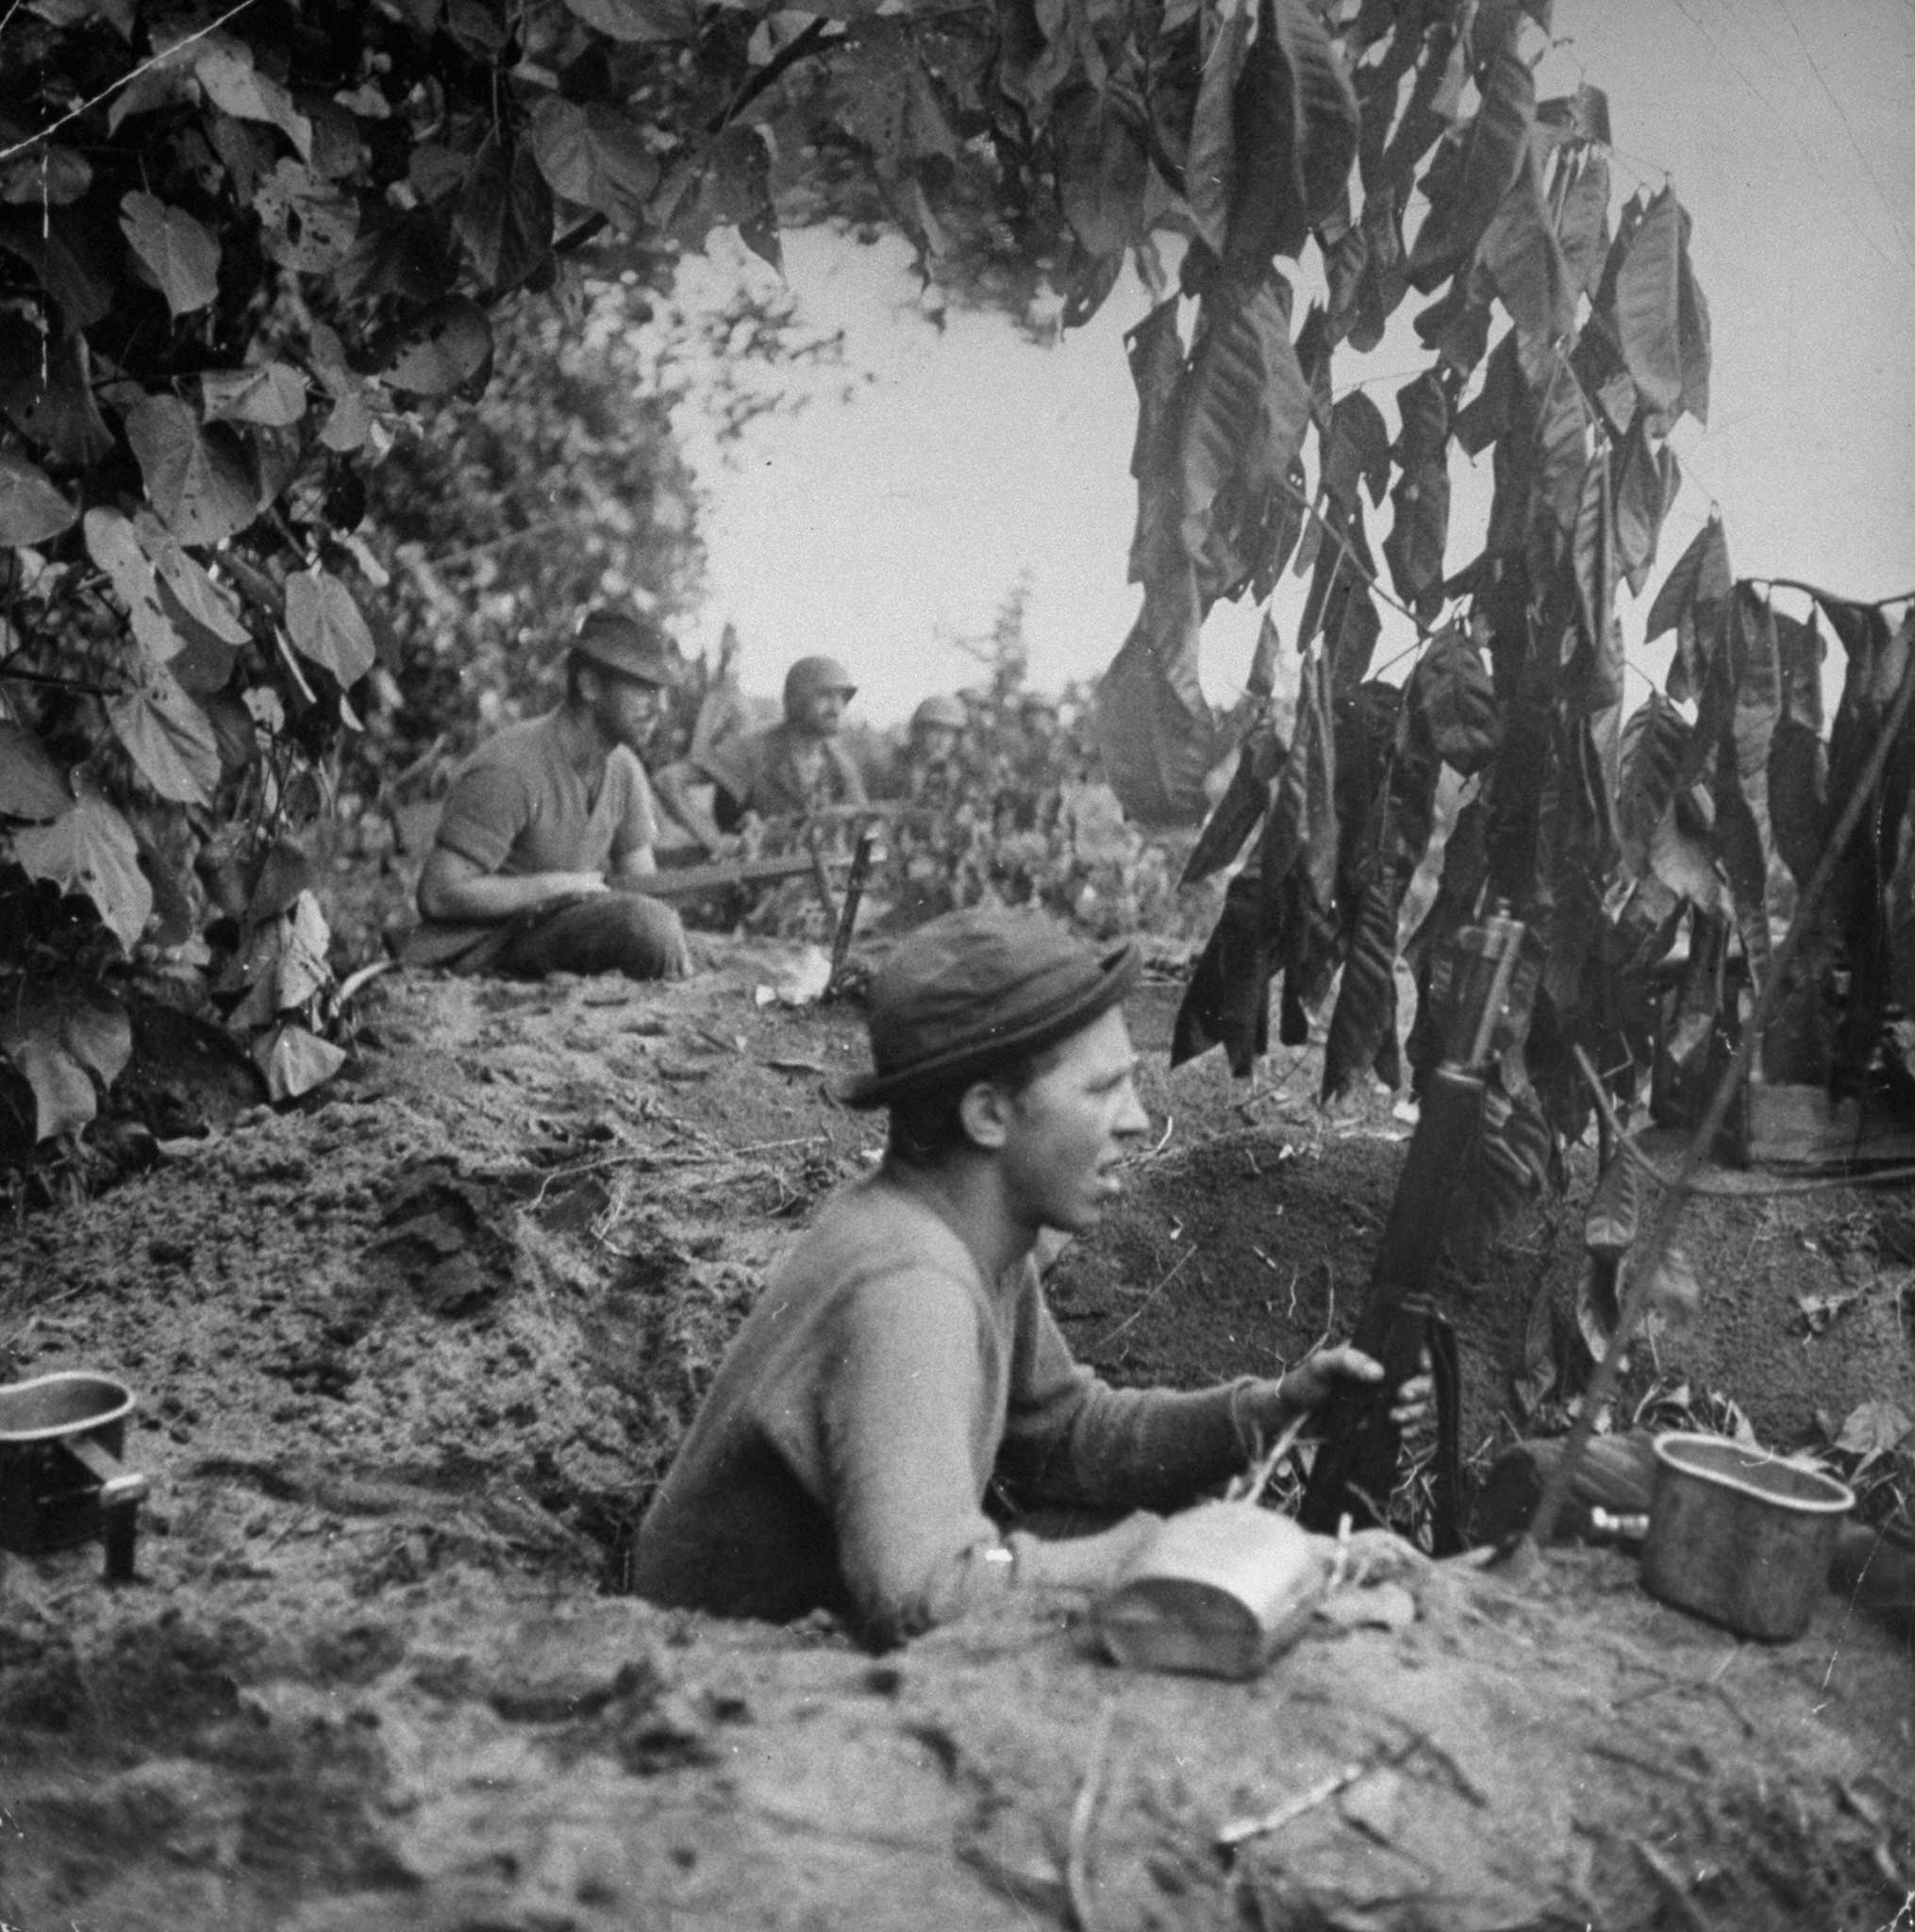 "On Bottcher's Corner men dig into foxholes to support machine-gun positions directly ahead of them. From the end of the corridor carved out by Bottcher's men between Buna Village and Buna Mission. A minute later one of these men was wounded."